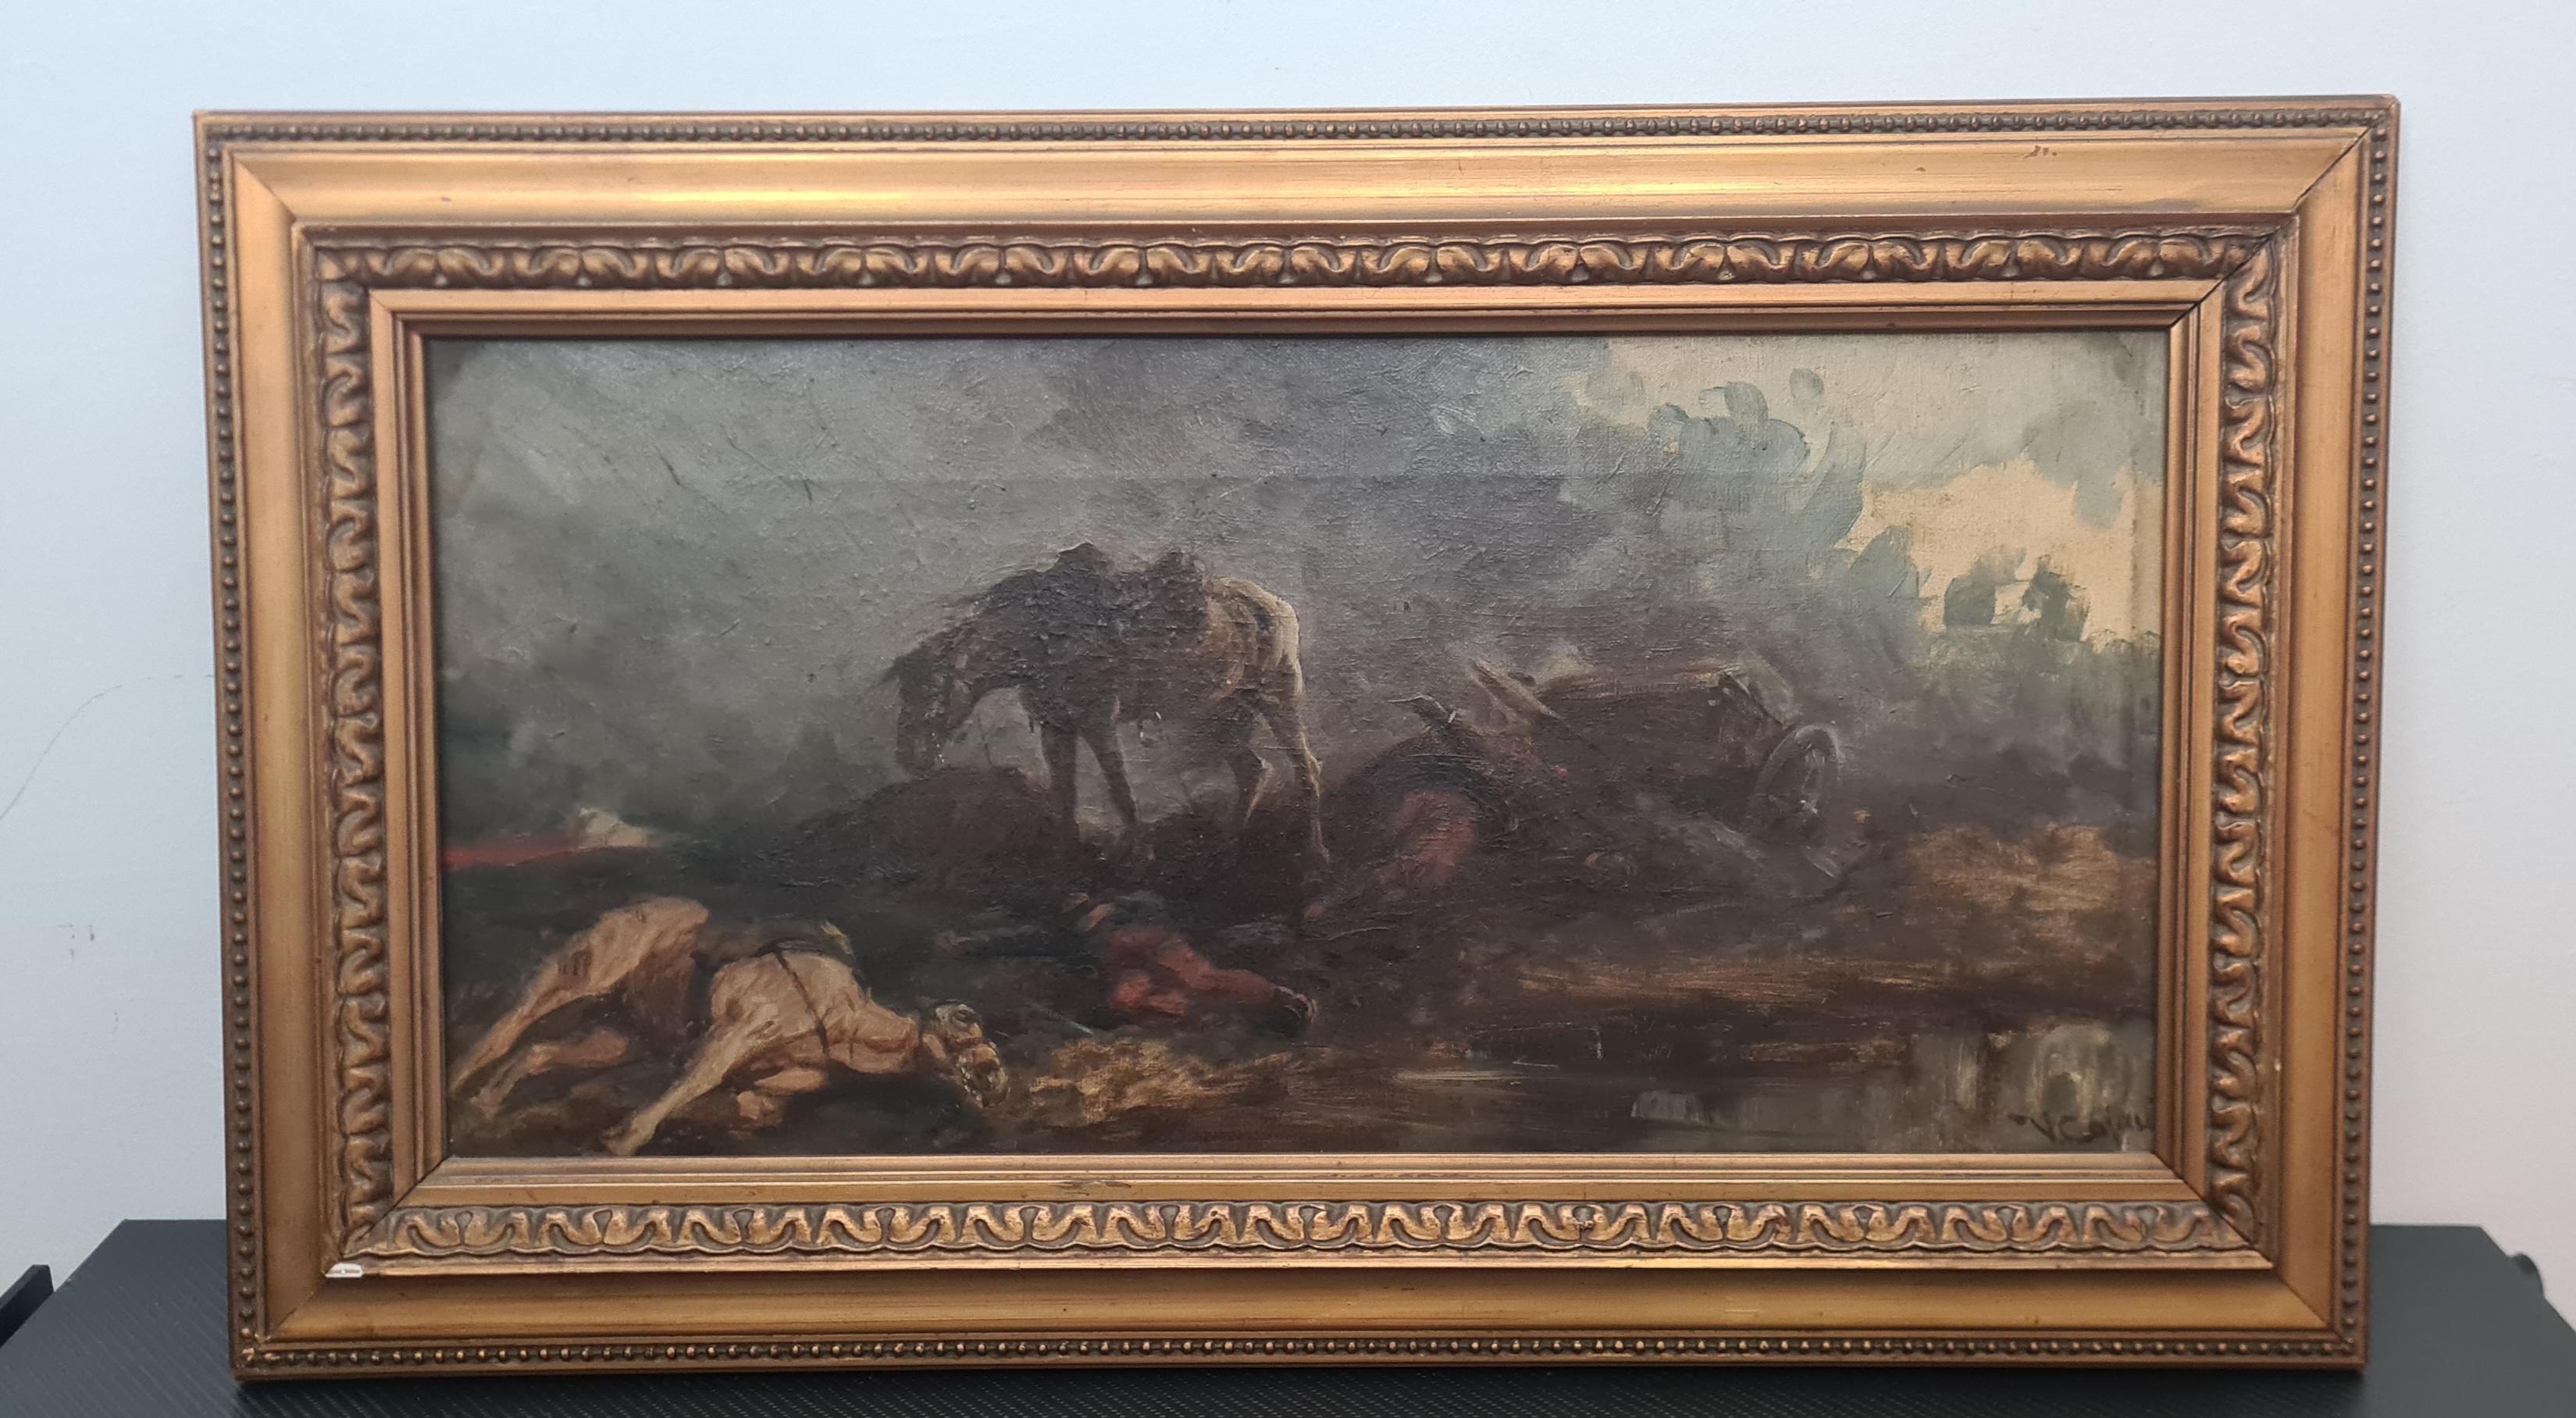 Vittorio Cajani's painting entitled La Forza Del Destino.

Vittorio Cajani was a Turin painter born in 1848 who saw his greatest output in the second half of the 19th century.

His depictions often dealt with scenes of horses or everyday populous